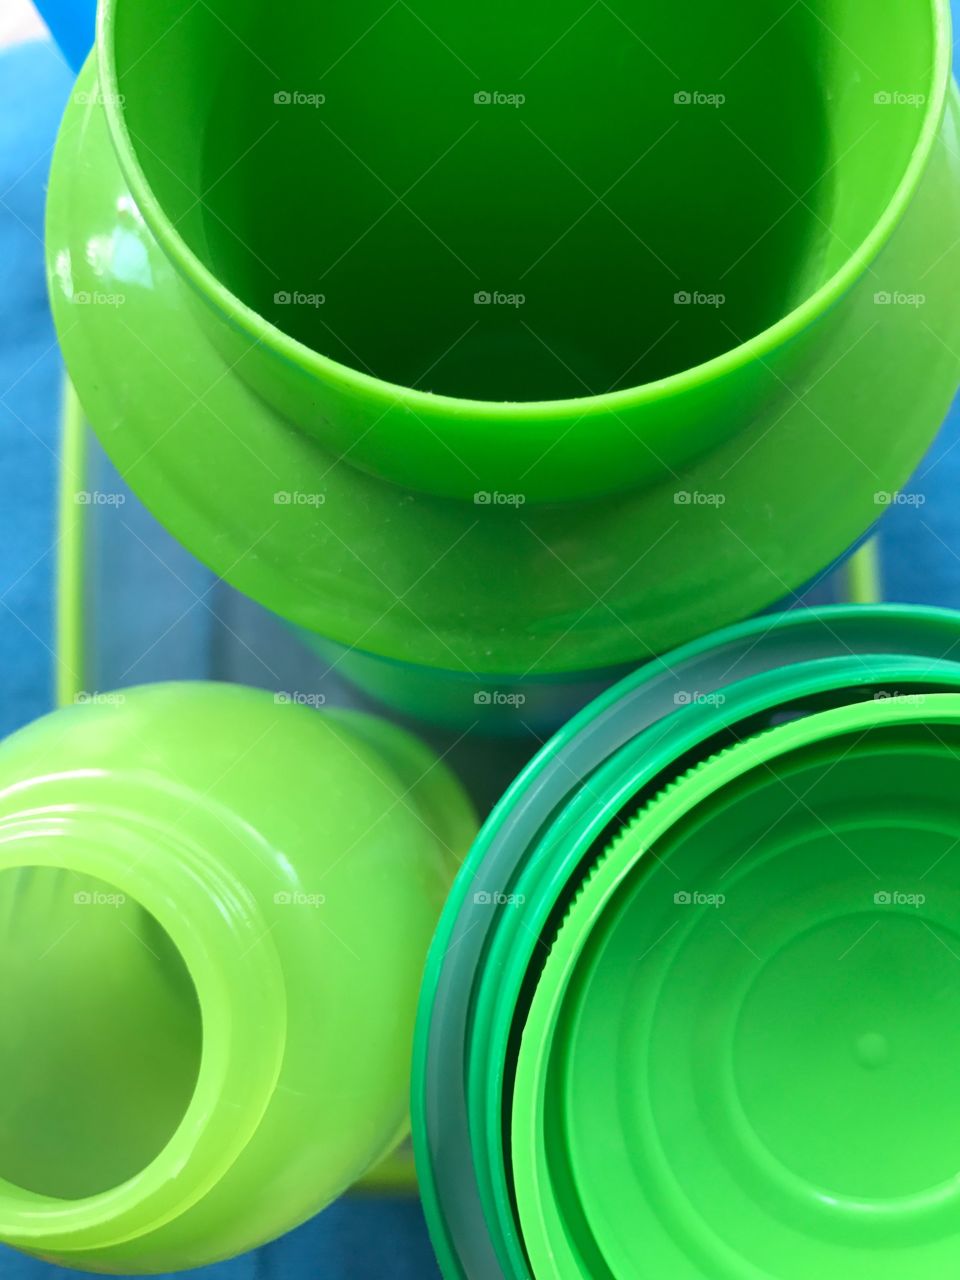 Green containers